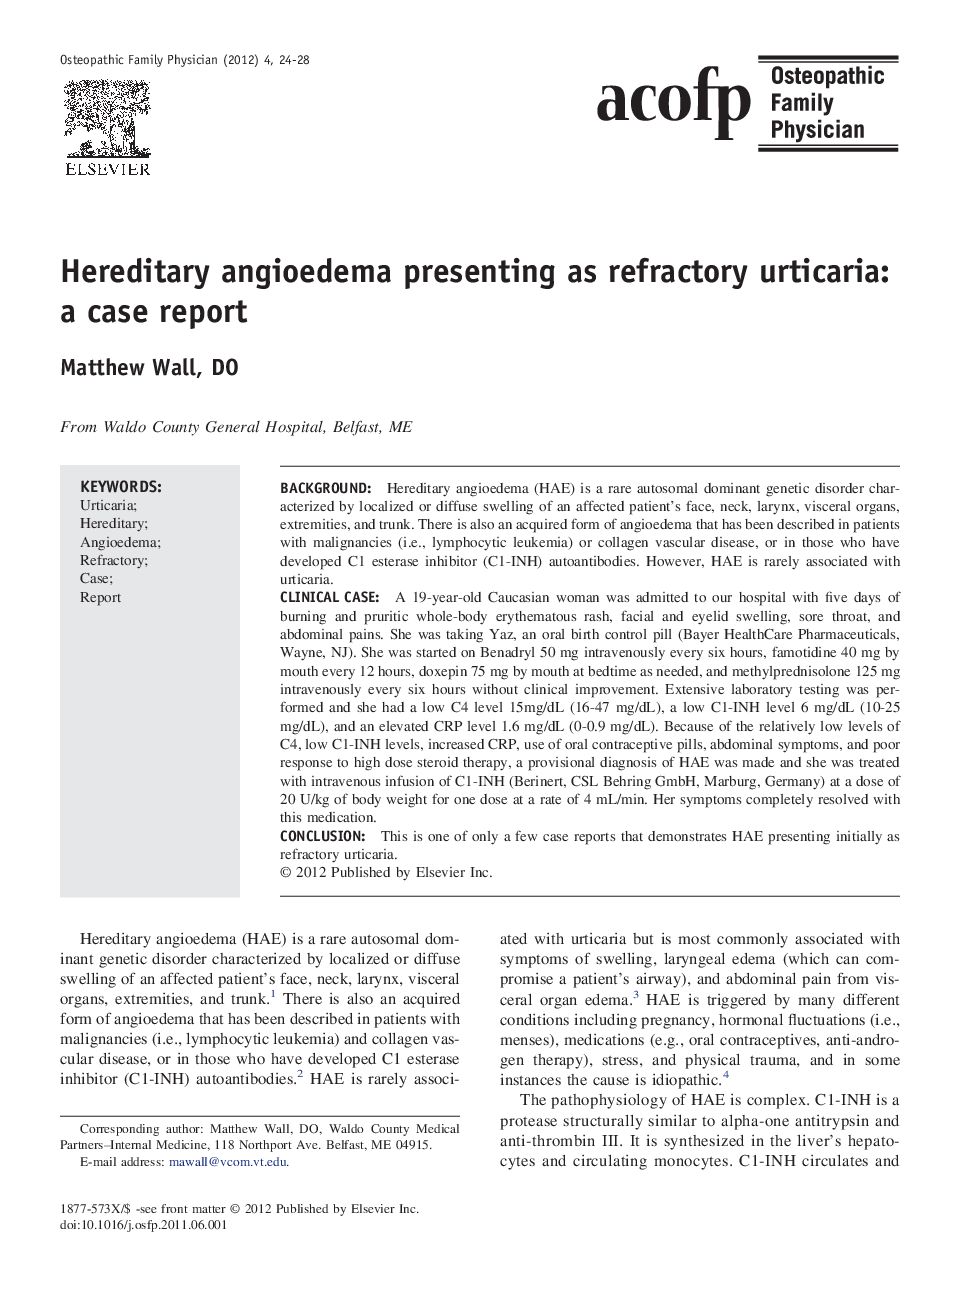 Hereditary angioedema presenting as refractory urticaria: a case report